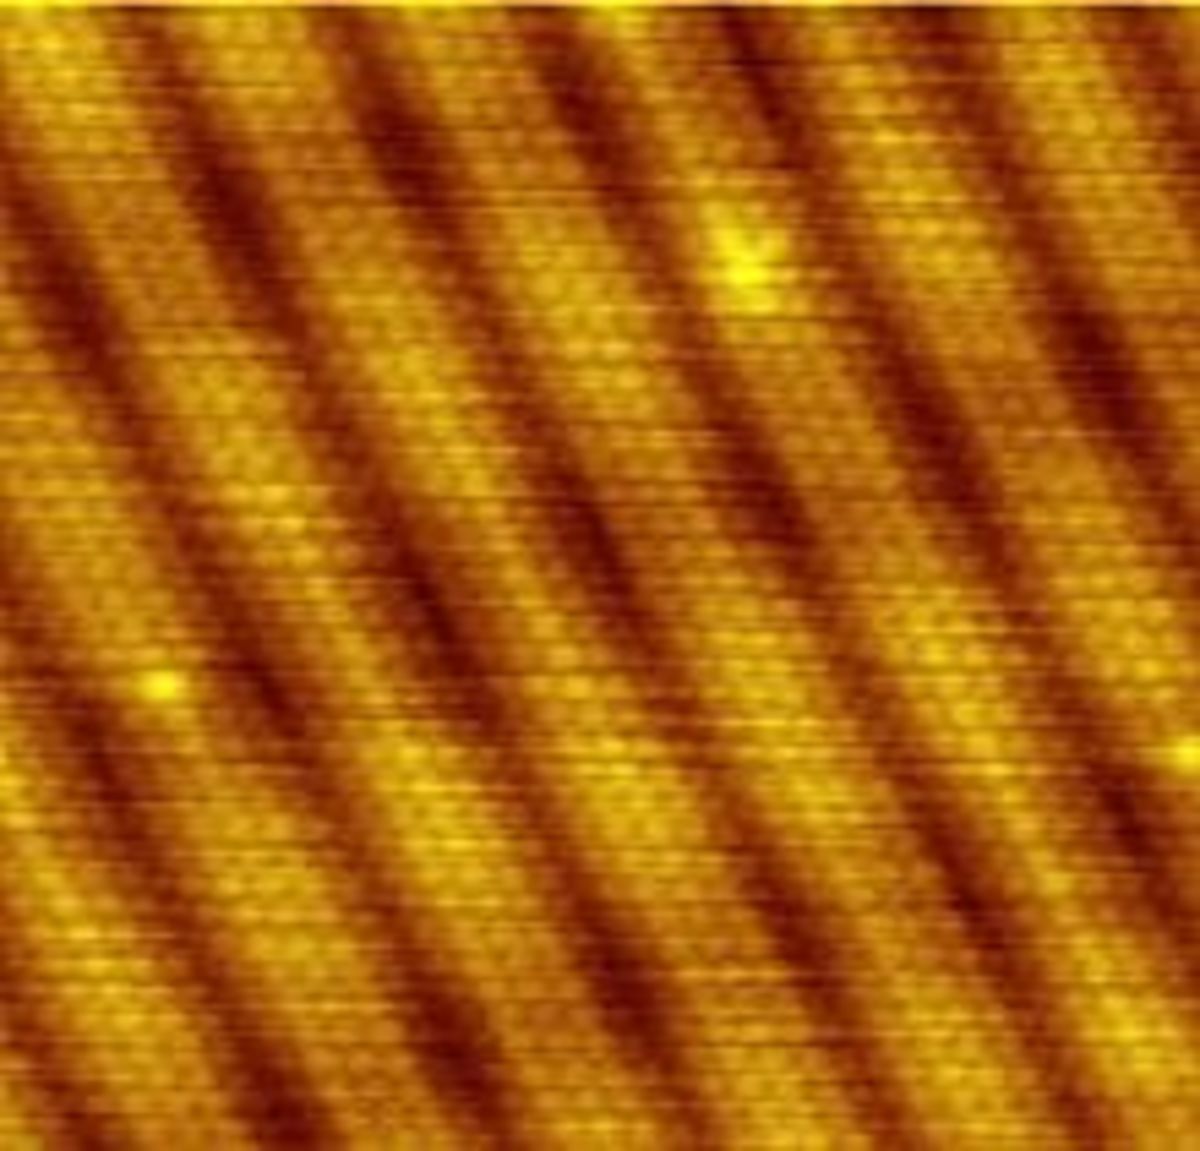 GOLD ATOMS AS SEEN THROUGH A "TUNNELING" MICROSCOPE - PICTURE 5